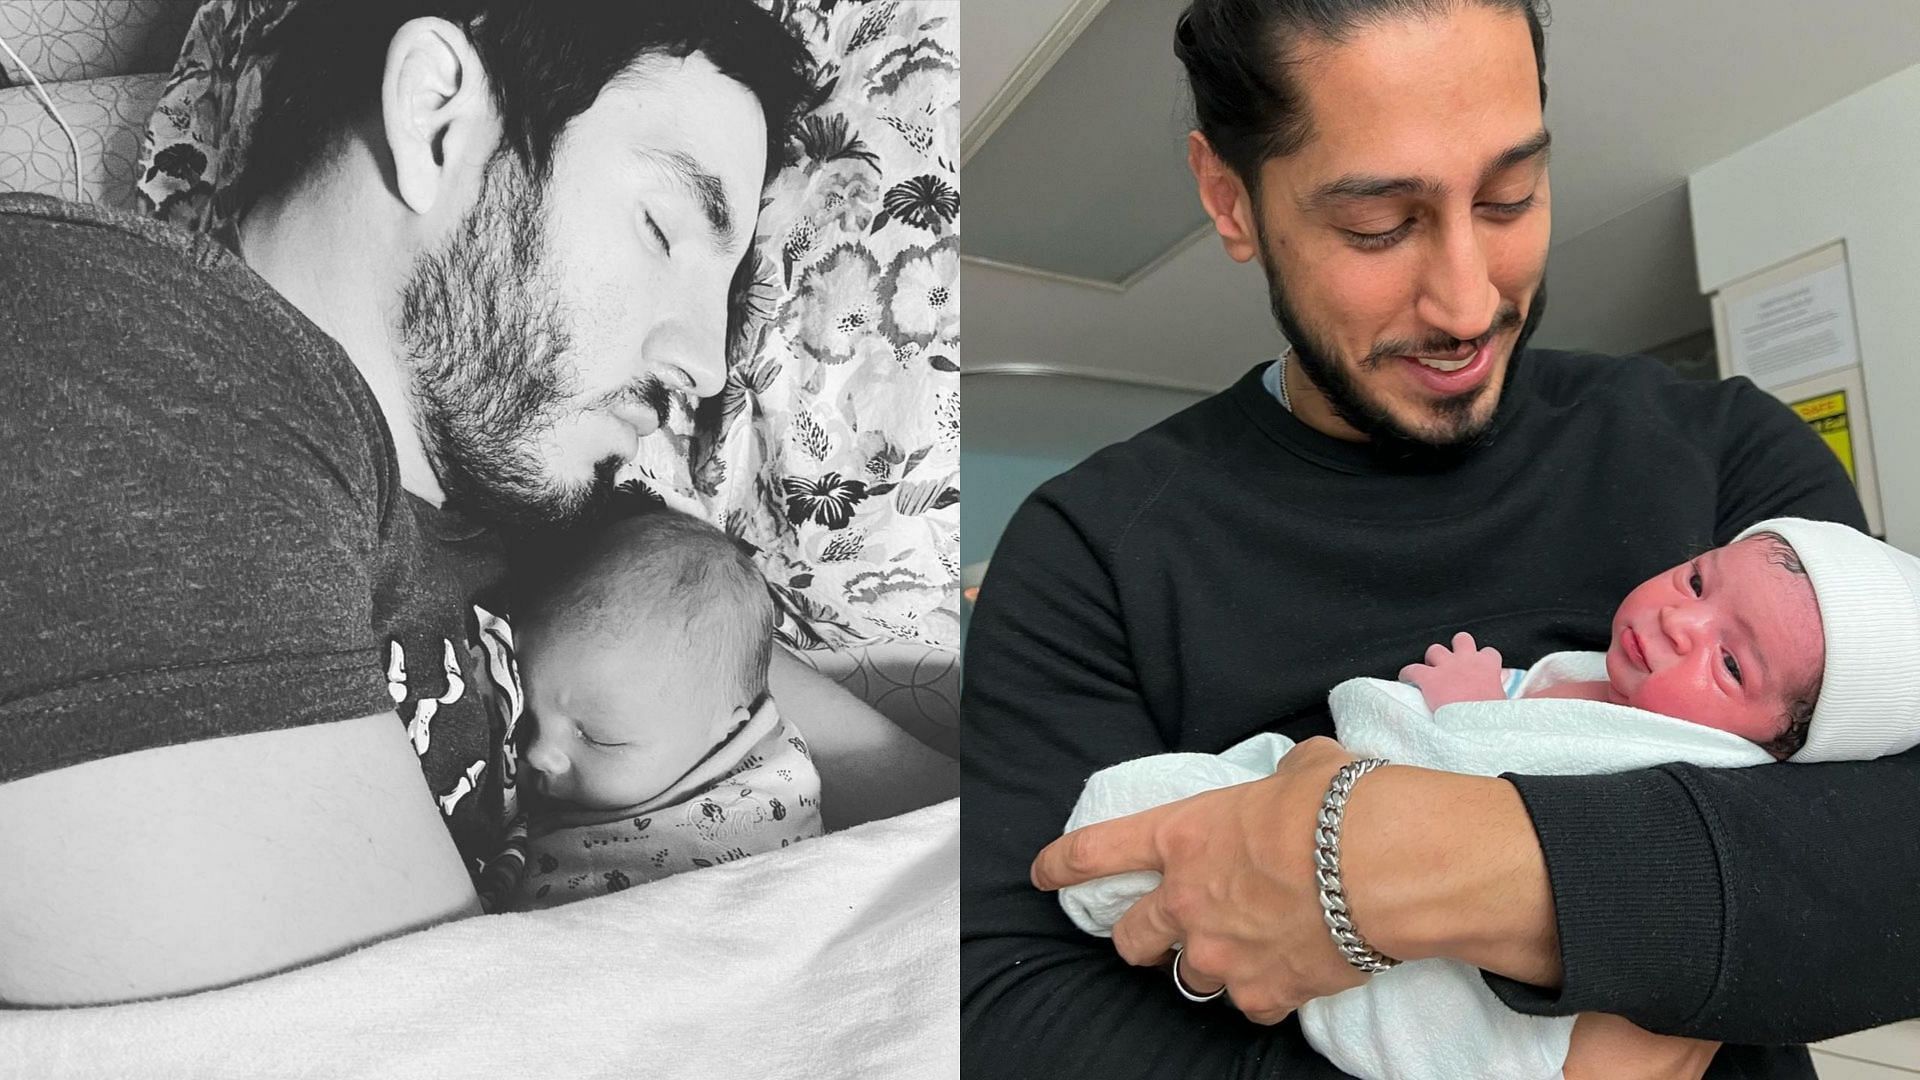 Johnny Gargano with his son (left) and Mustafa Ali with his daughter (right)